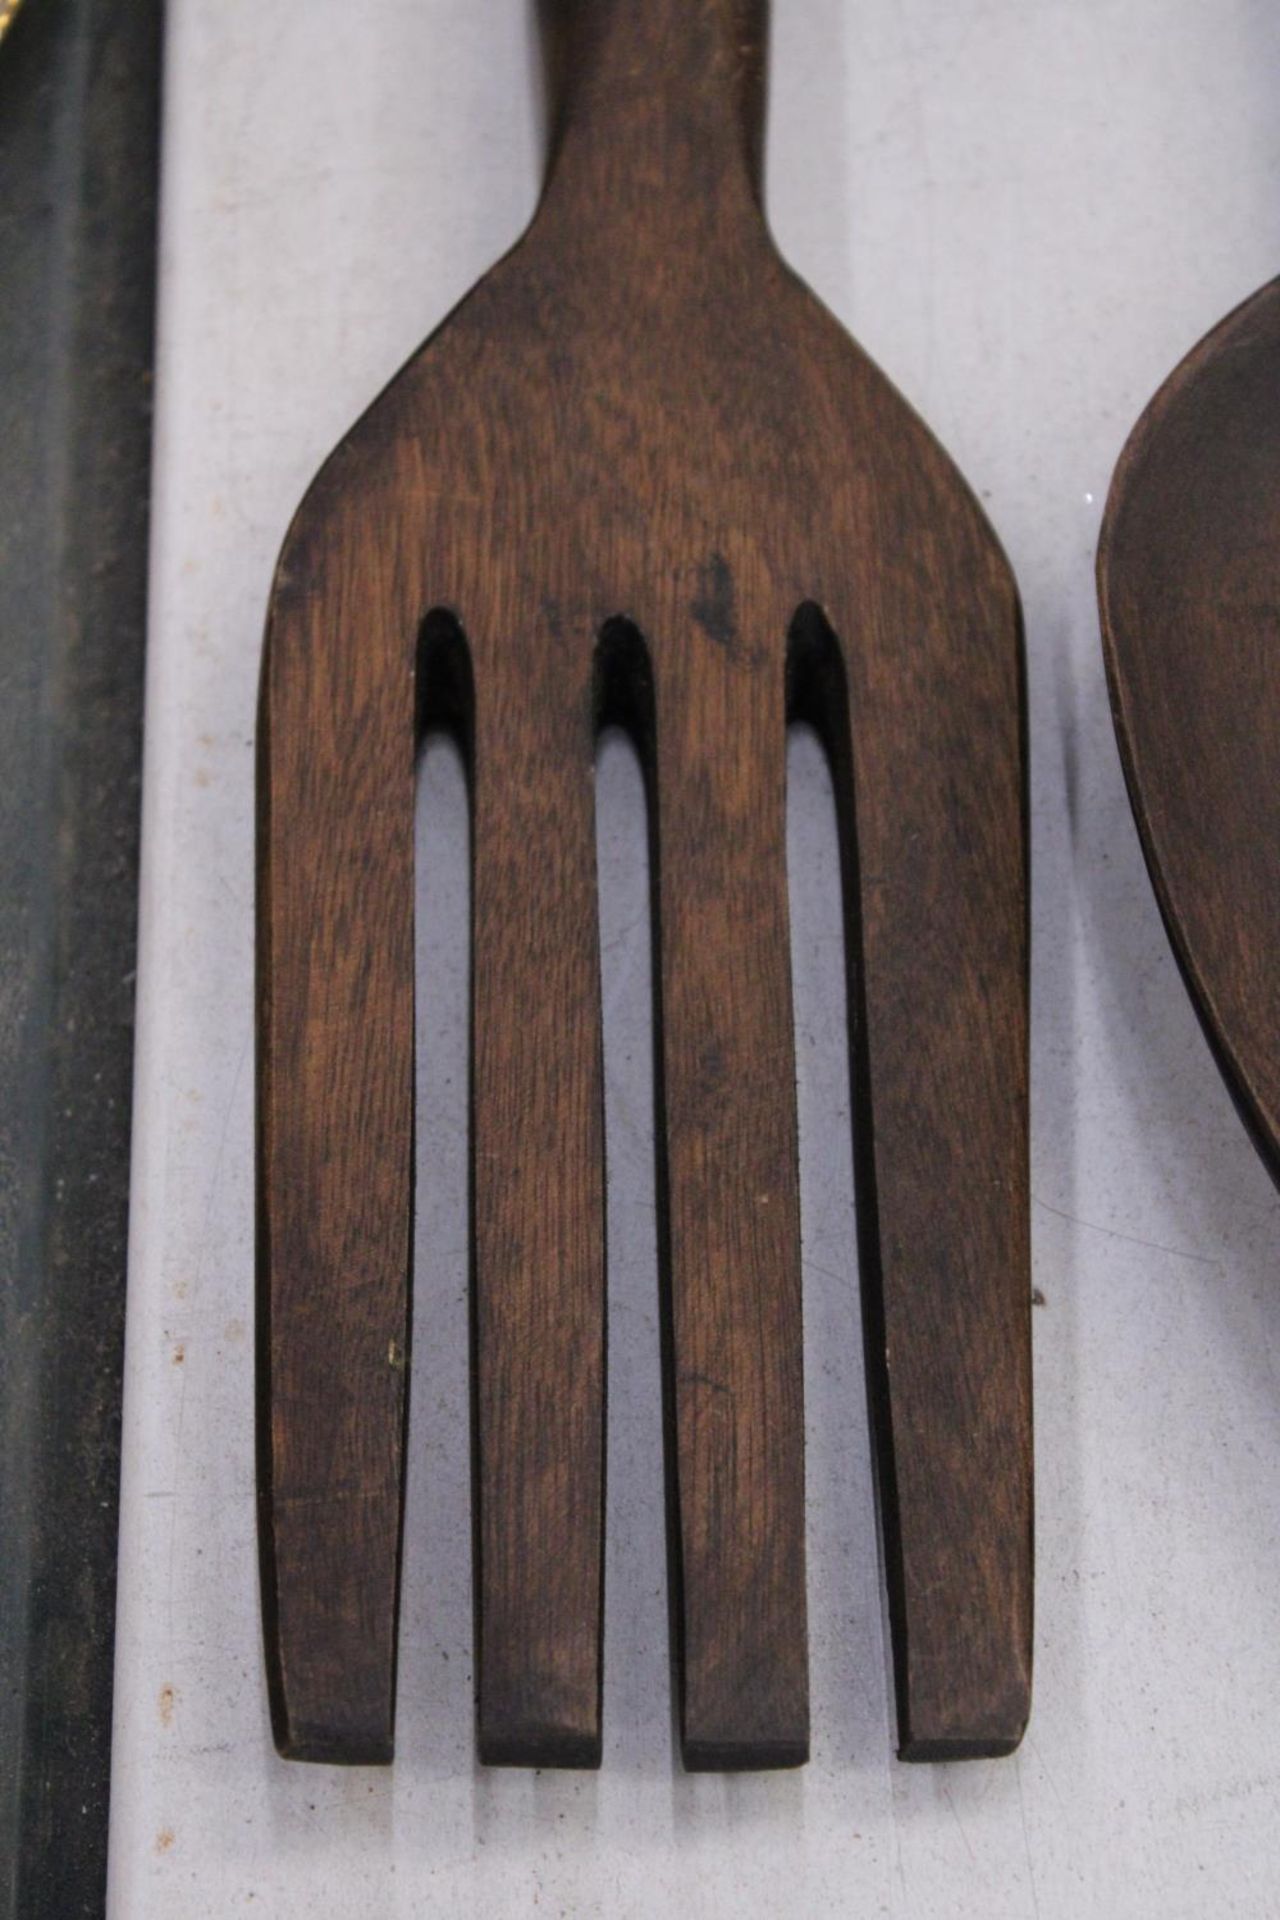 TWO LARGE WOODEN WALL DECORATIONS OF A FORK AND SPOON - Image 3 of 6